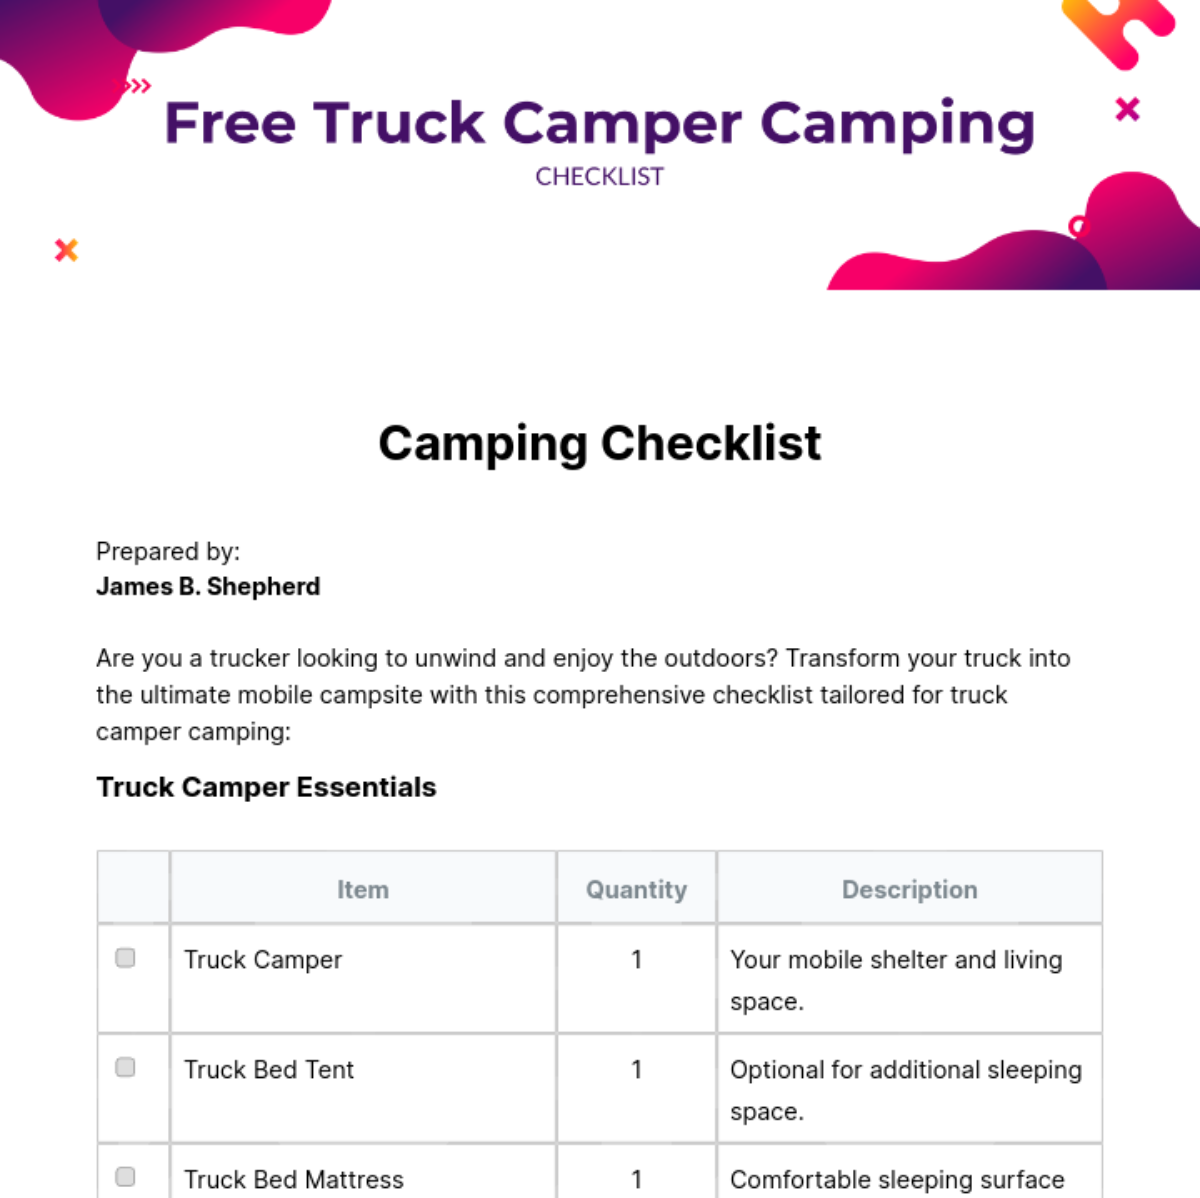 Free Truck Camper Camping Checklist Template